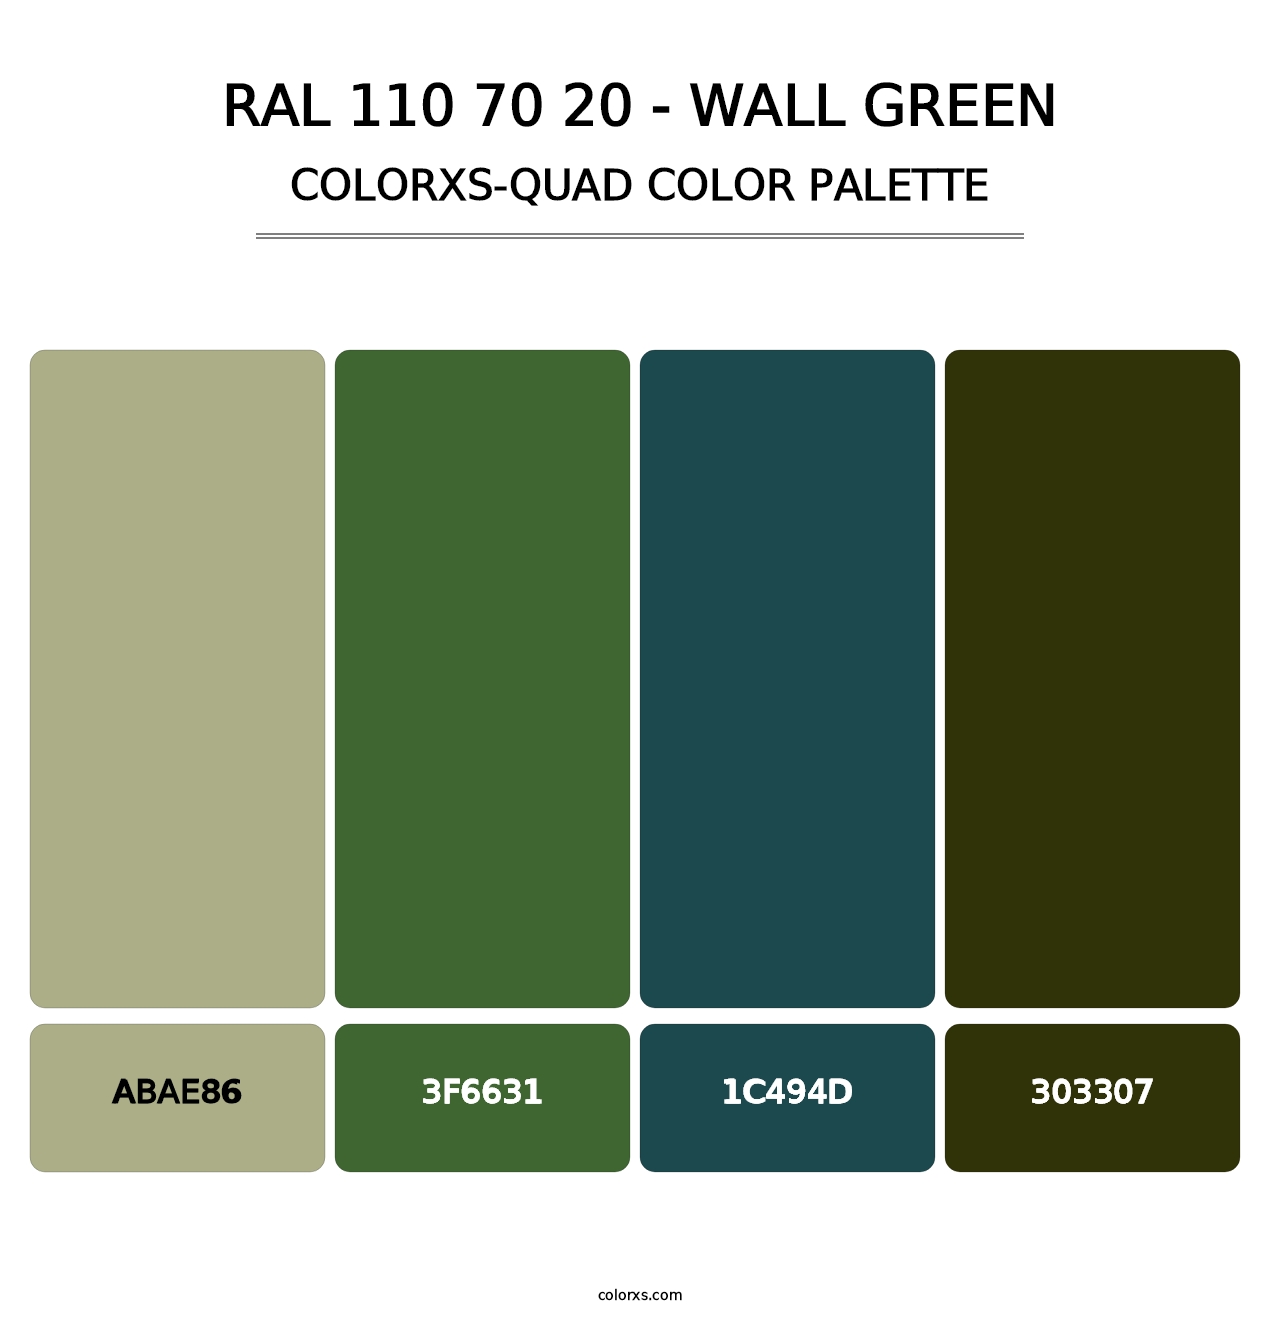 RAL 110 70 20 - Wall Green - Colorxs Quad Palette